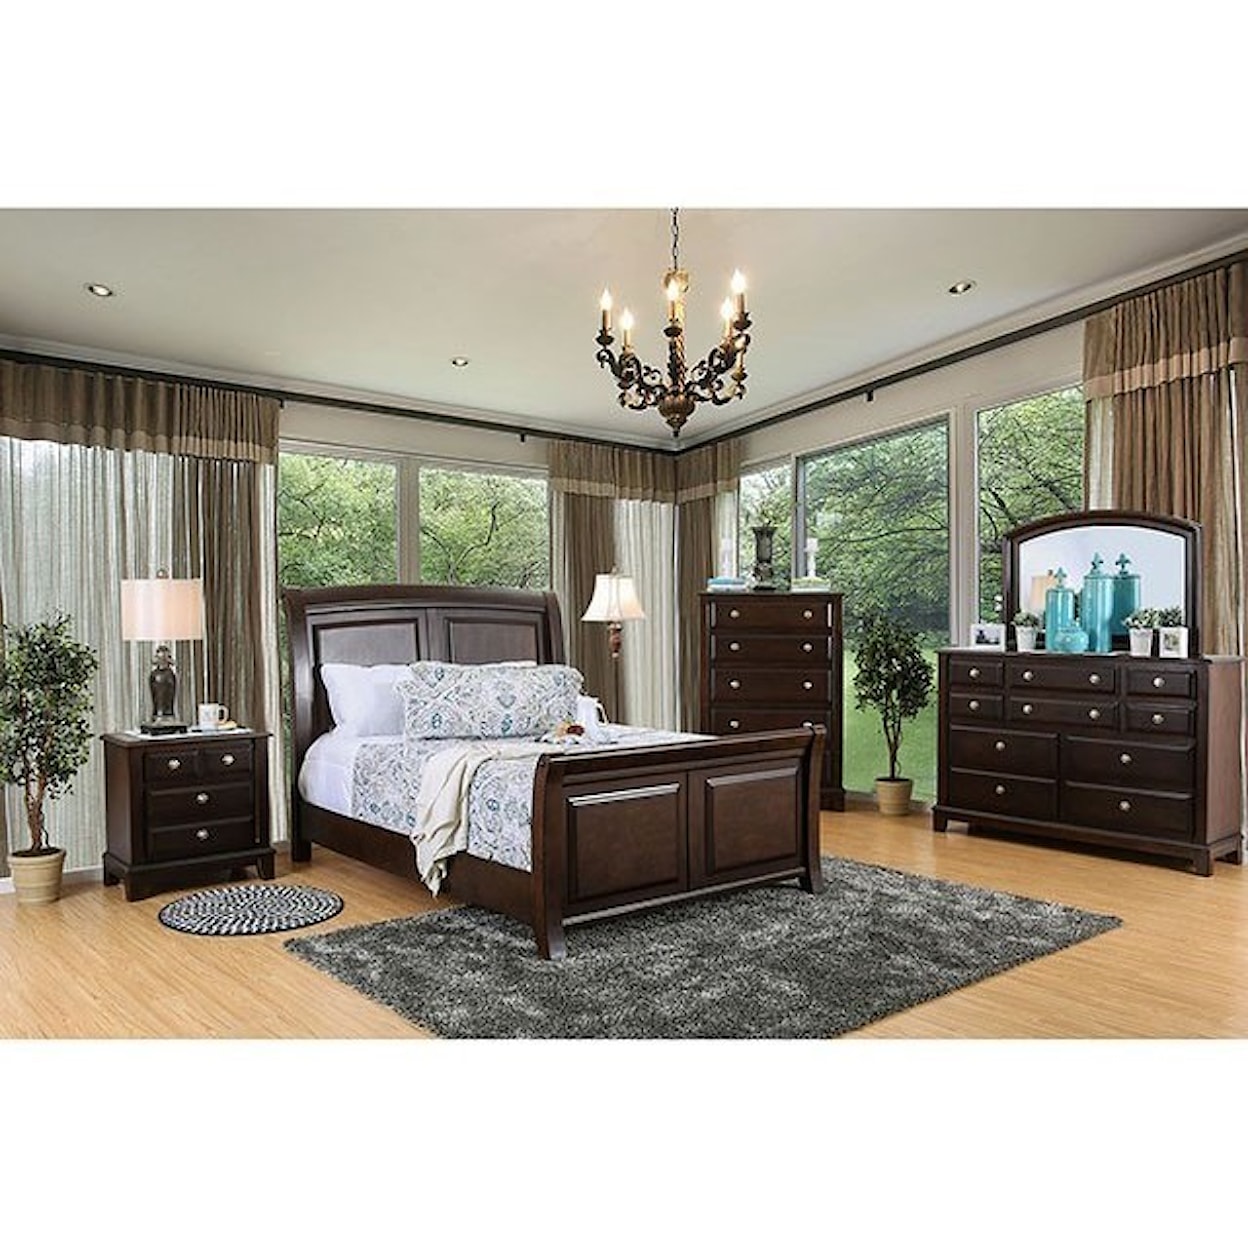 Furniture of America Litchville King Sleigh Bed